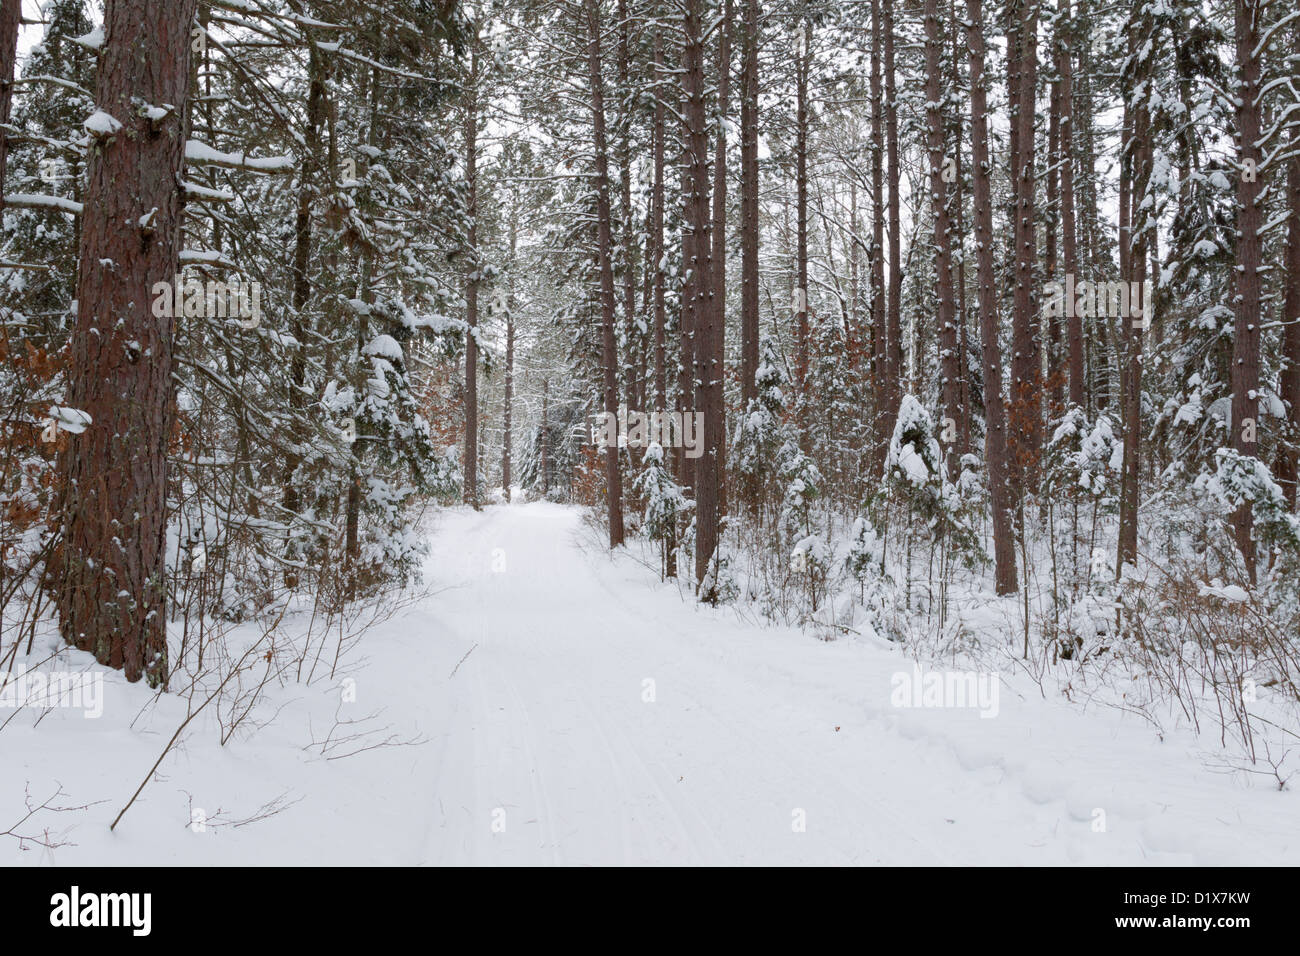 Typical Northern Minnesota winter forest scene along a recreational trail - Chippewa National Forest. Stock Photo